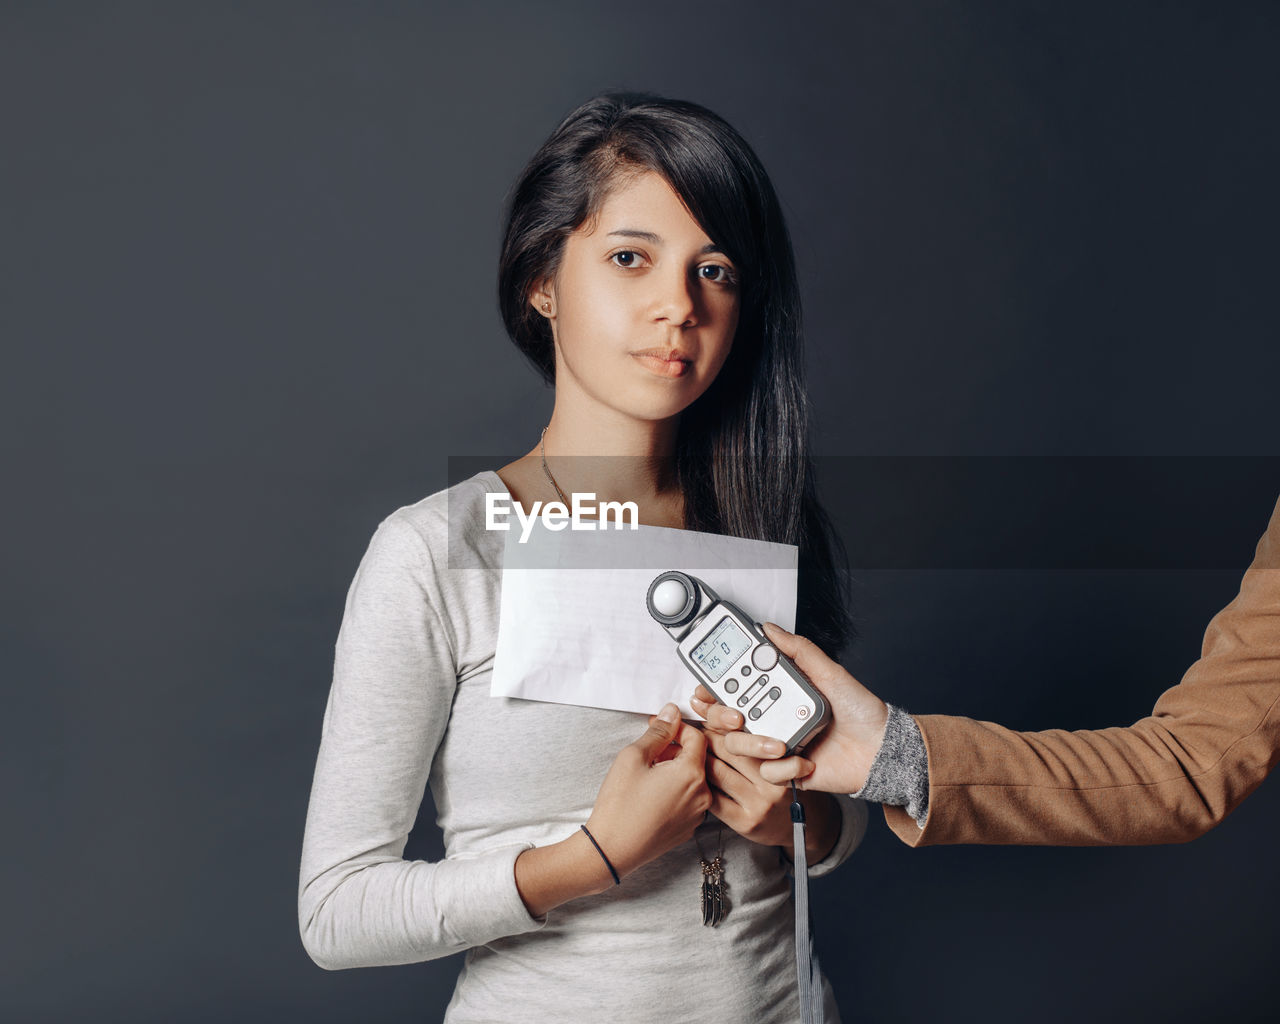 Cropped hand of person holding light meter over woman standing against gray background